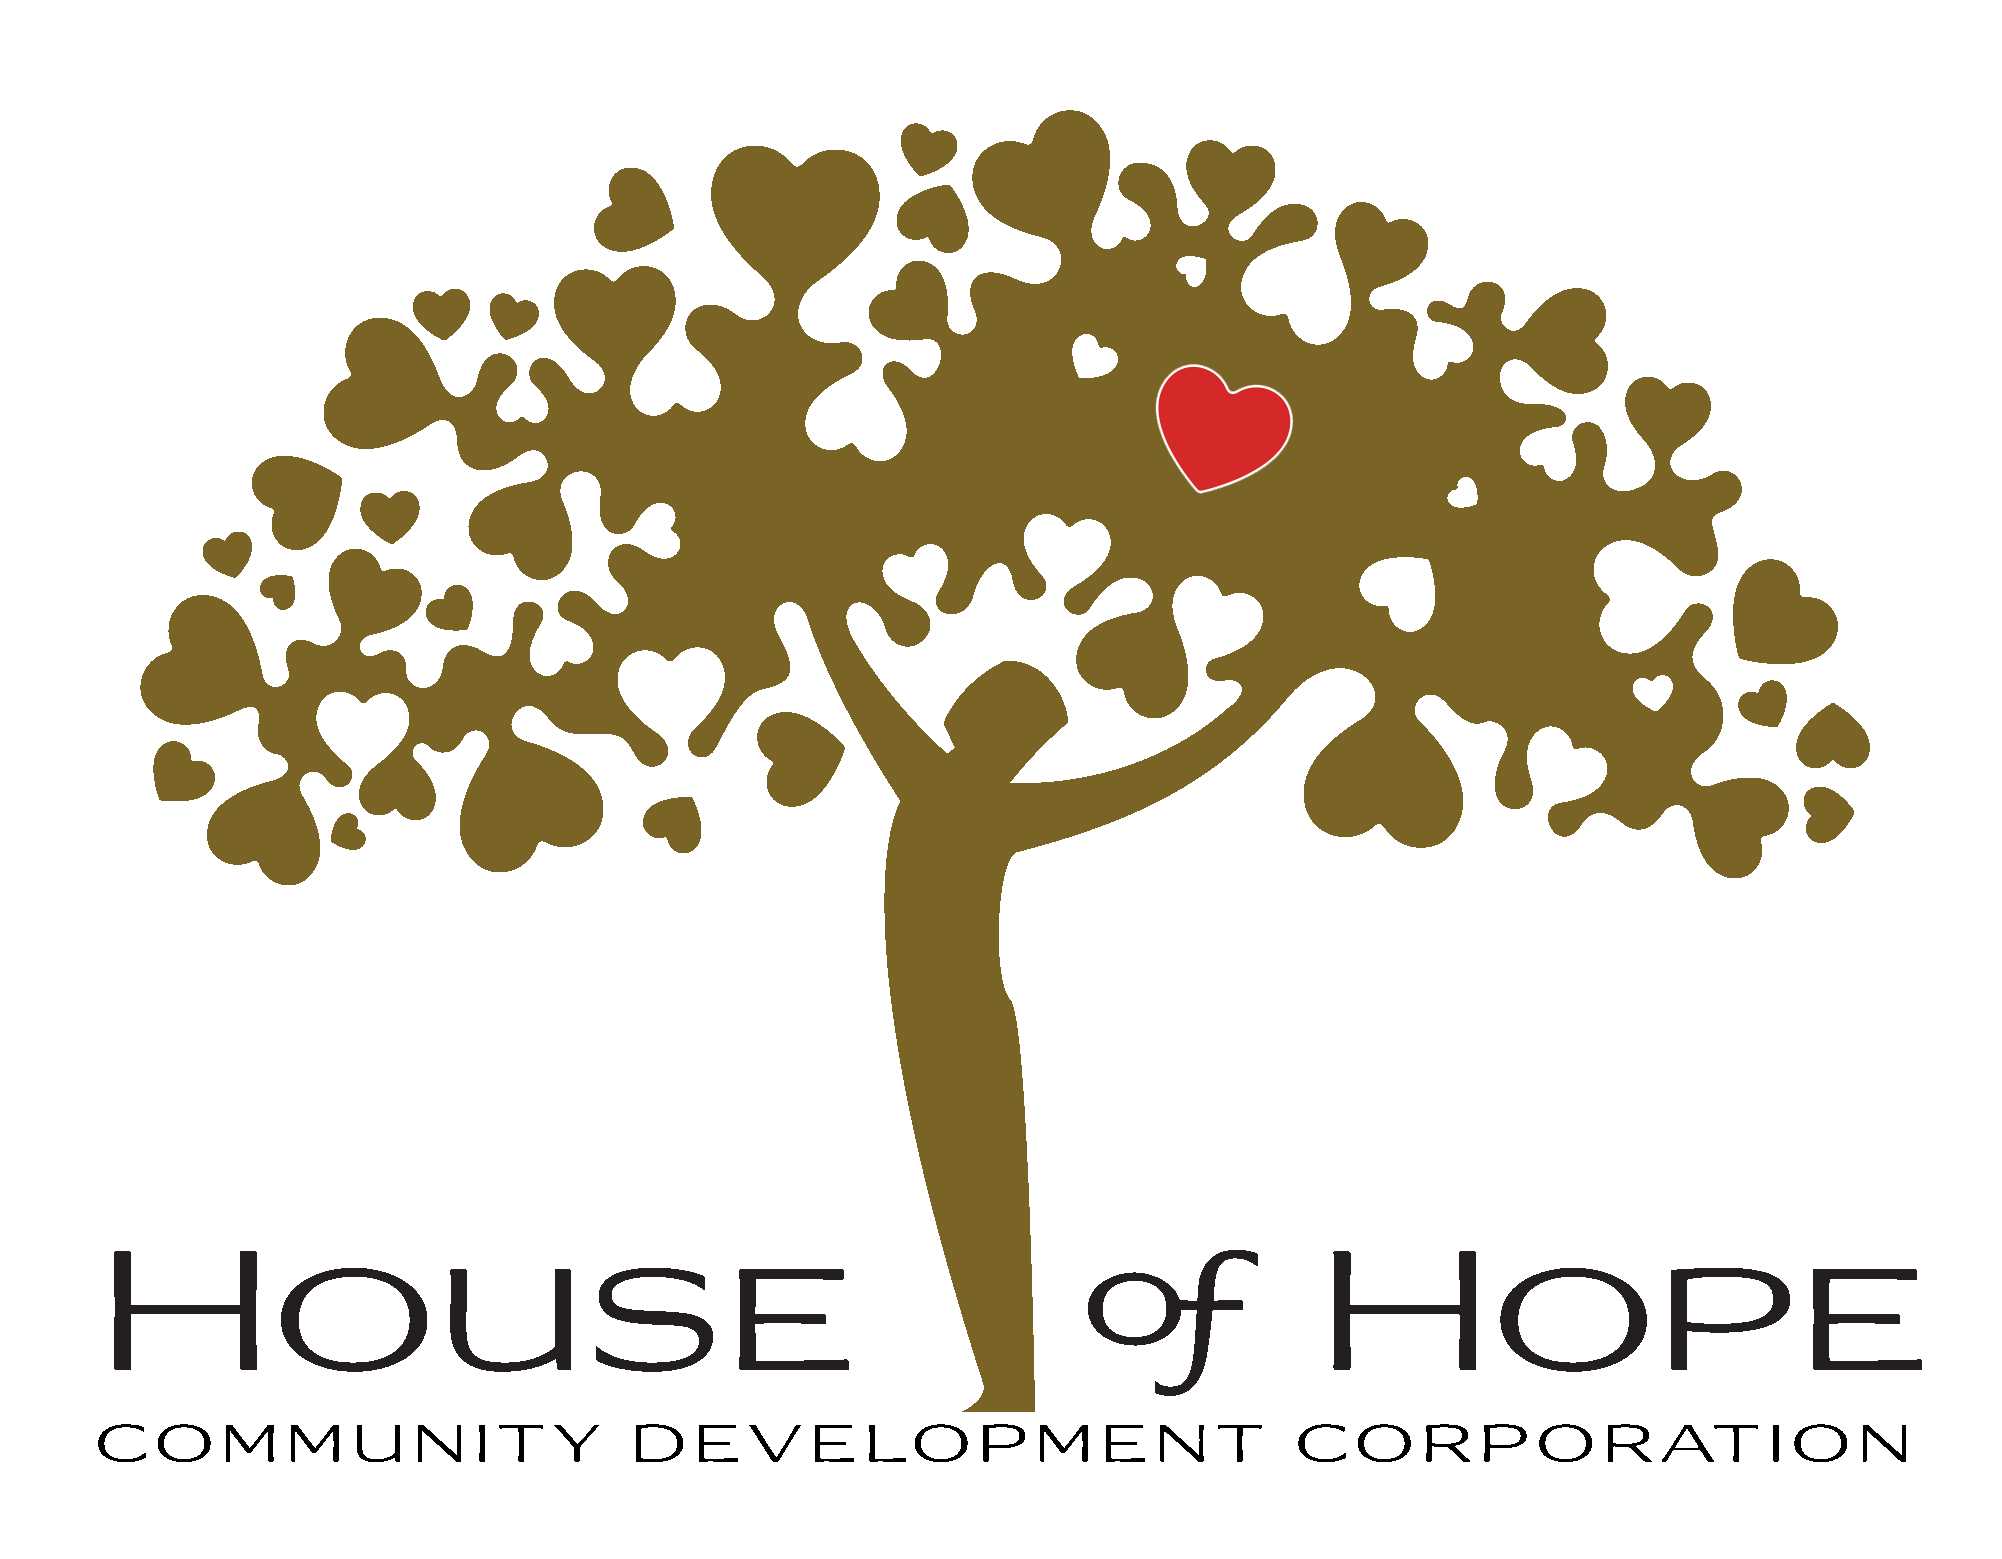 House of Hope Cdc